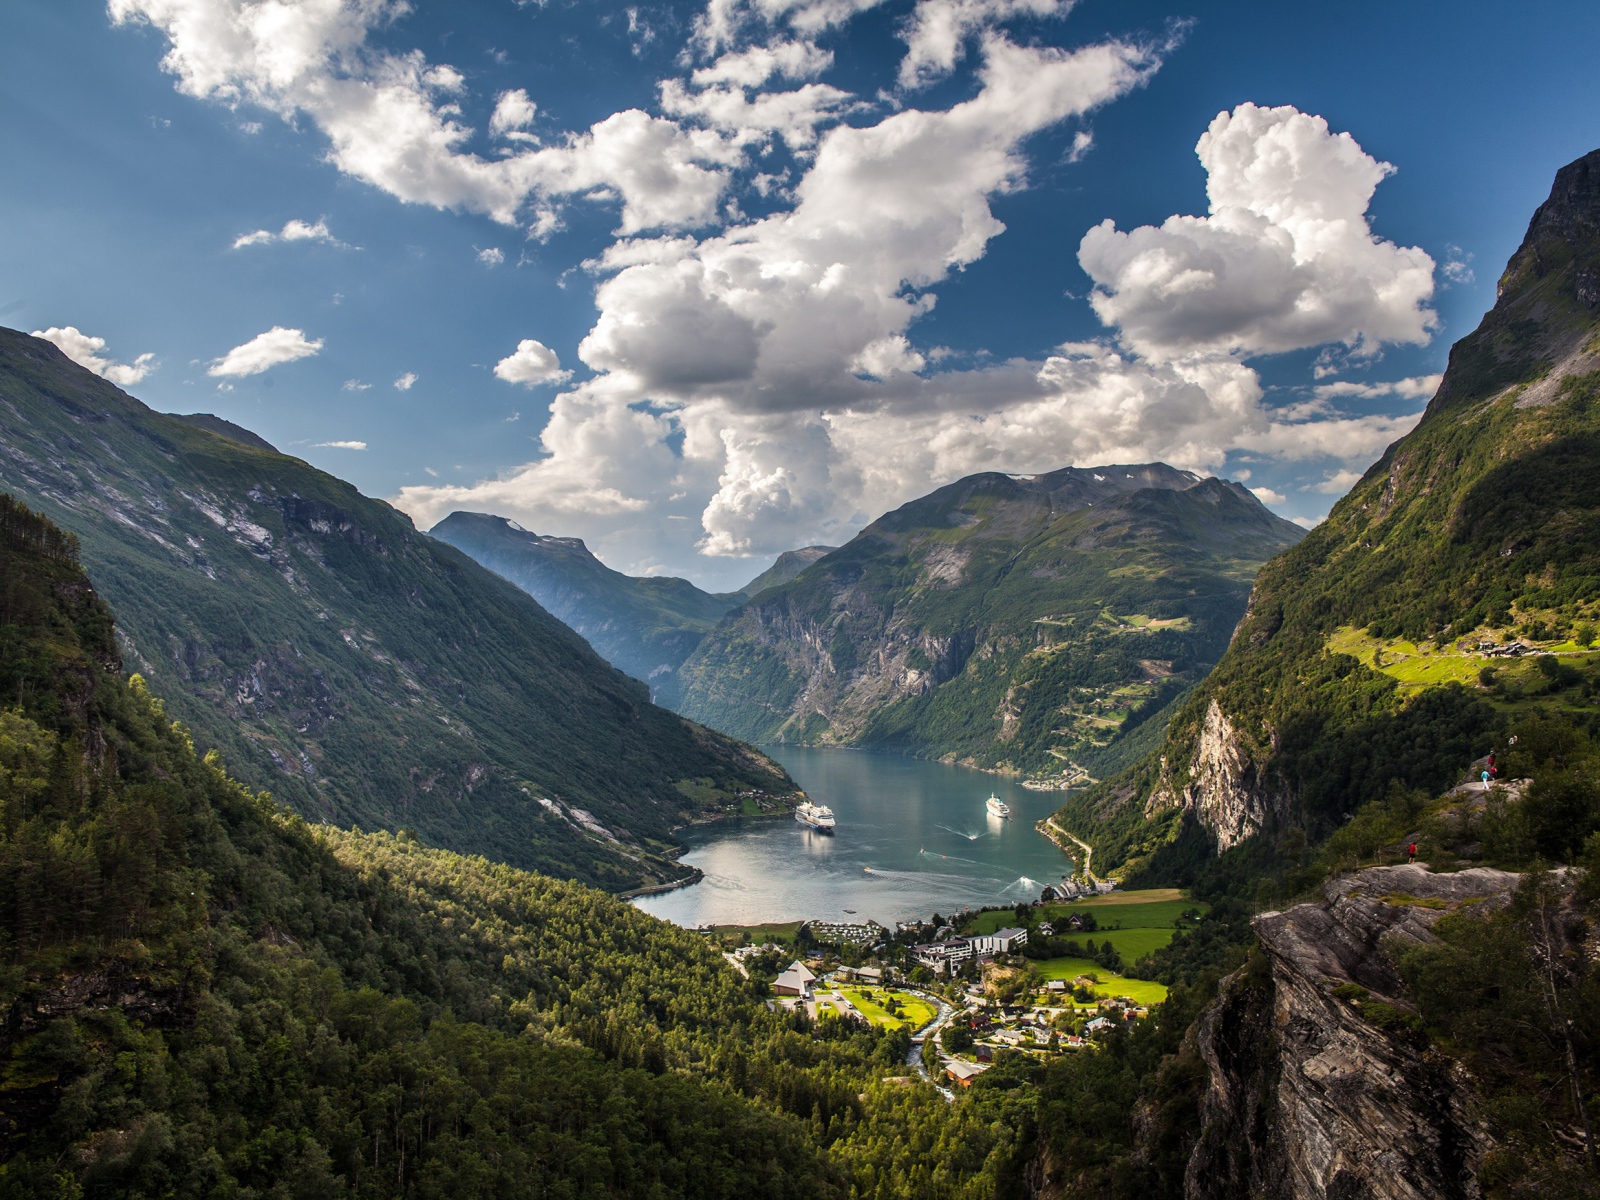 Beautiful sky over the city in the Geiranger fjord, Norway